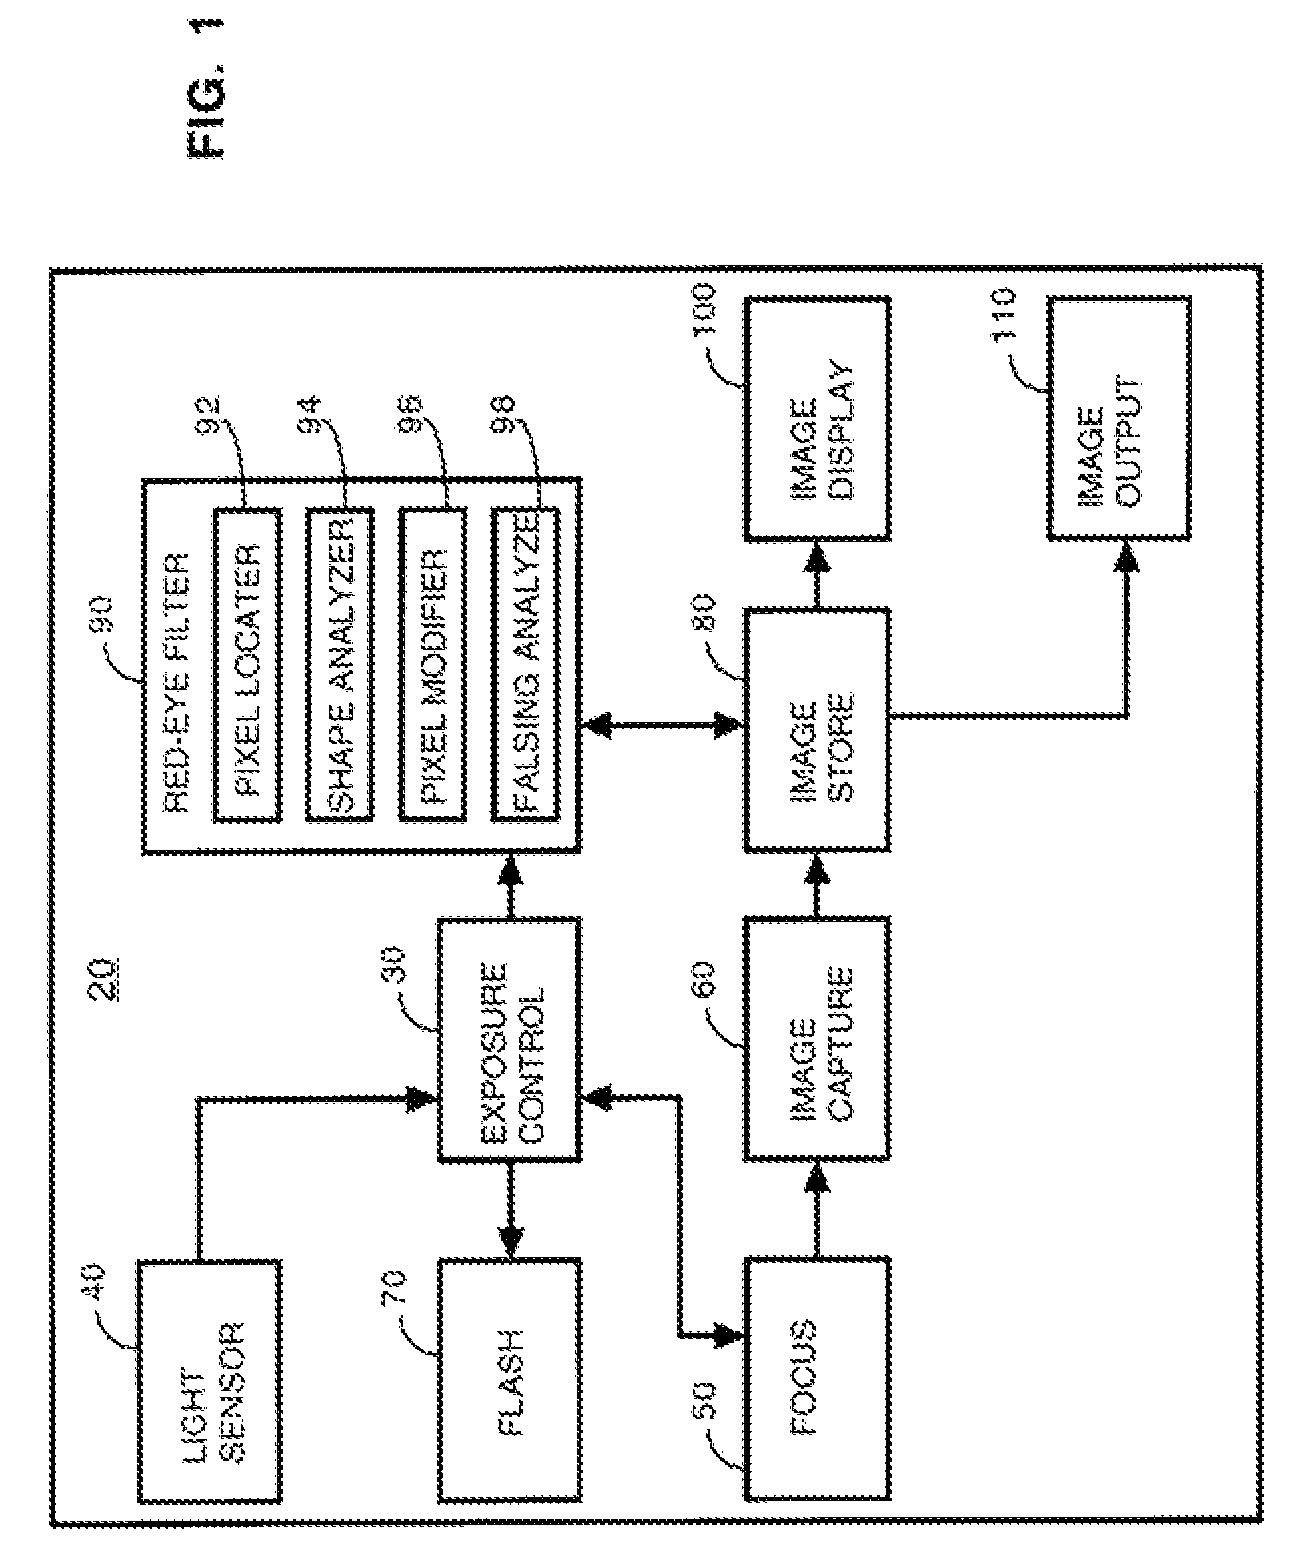 Red eye filter for in-camera digital image processing within a face of an acquired subject